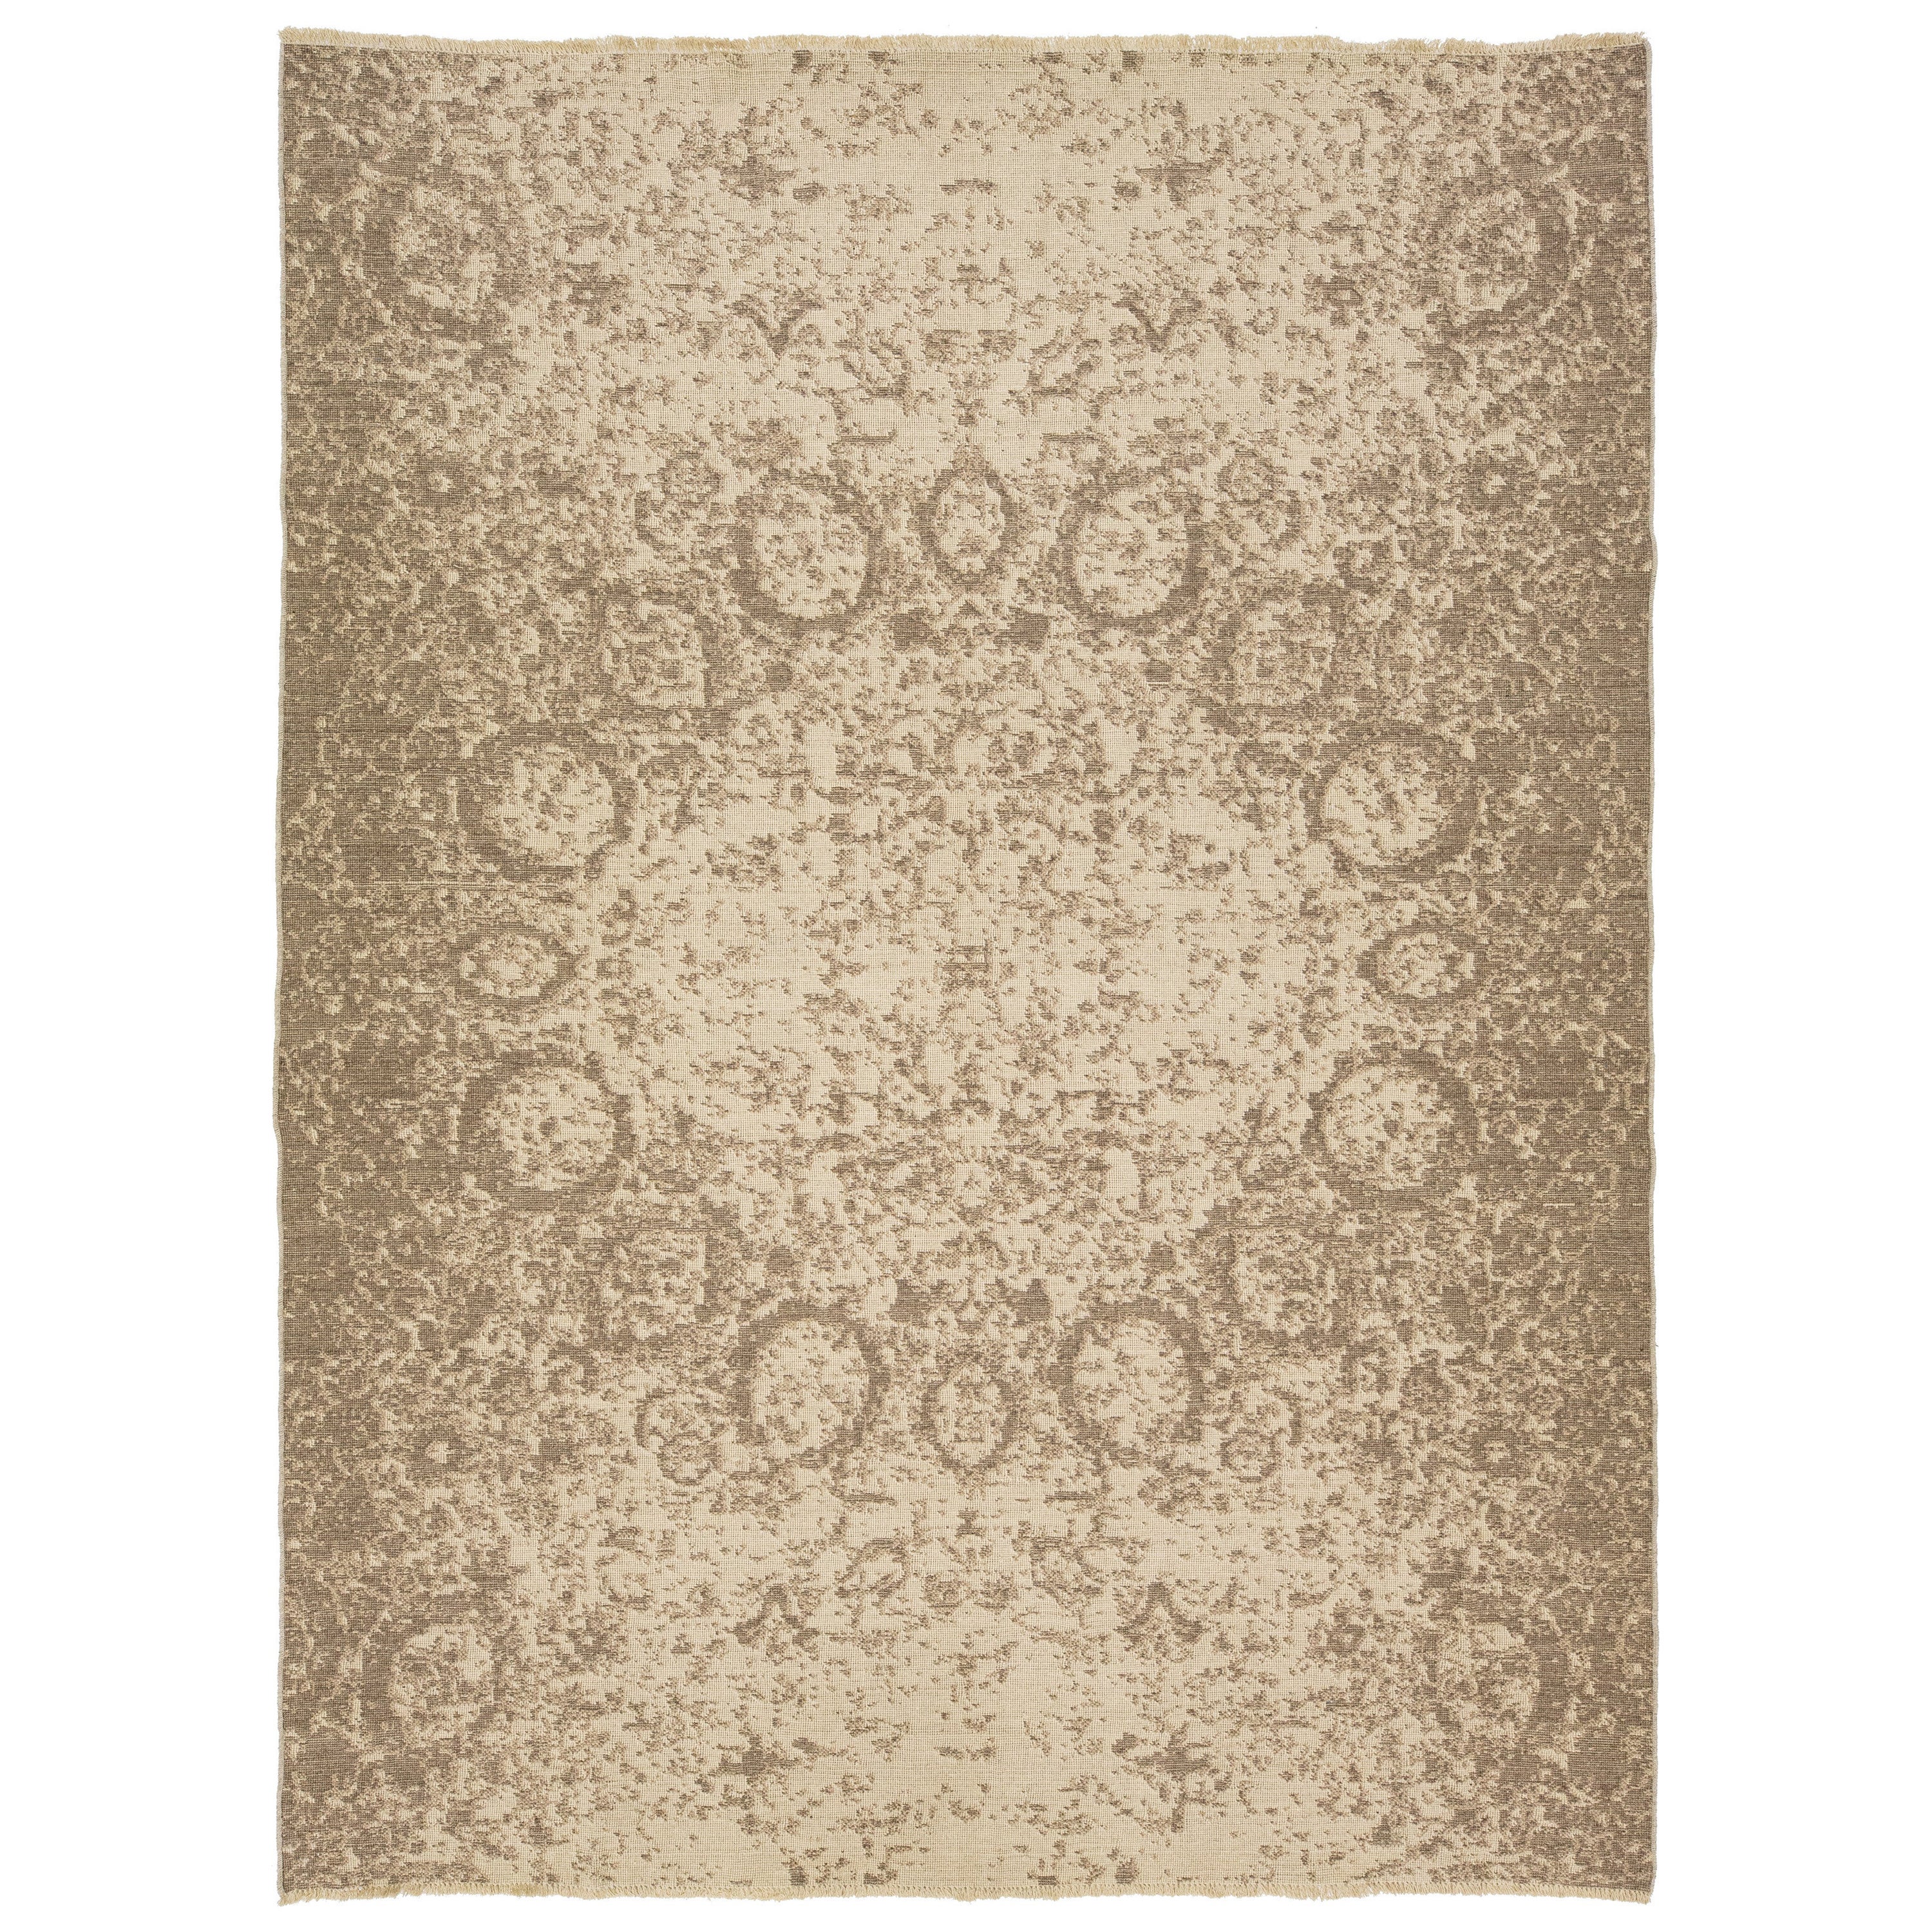 Contemporary Room Size Wool Rug Hand Loom In Beige With Center Design For Sale